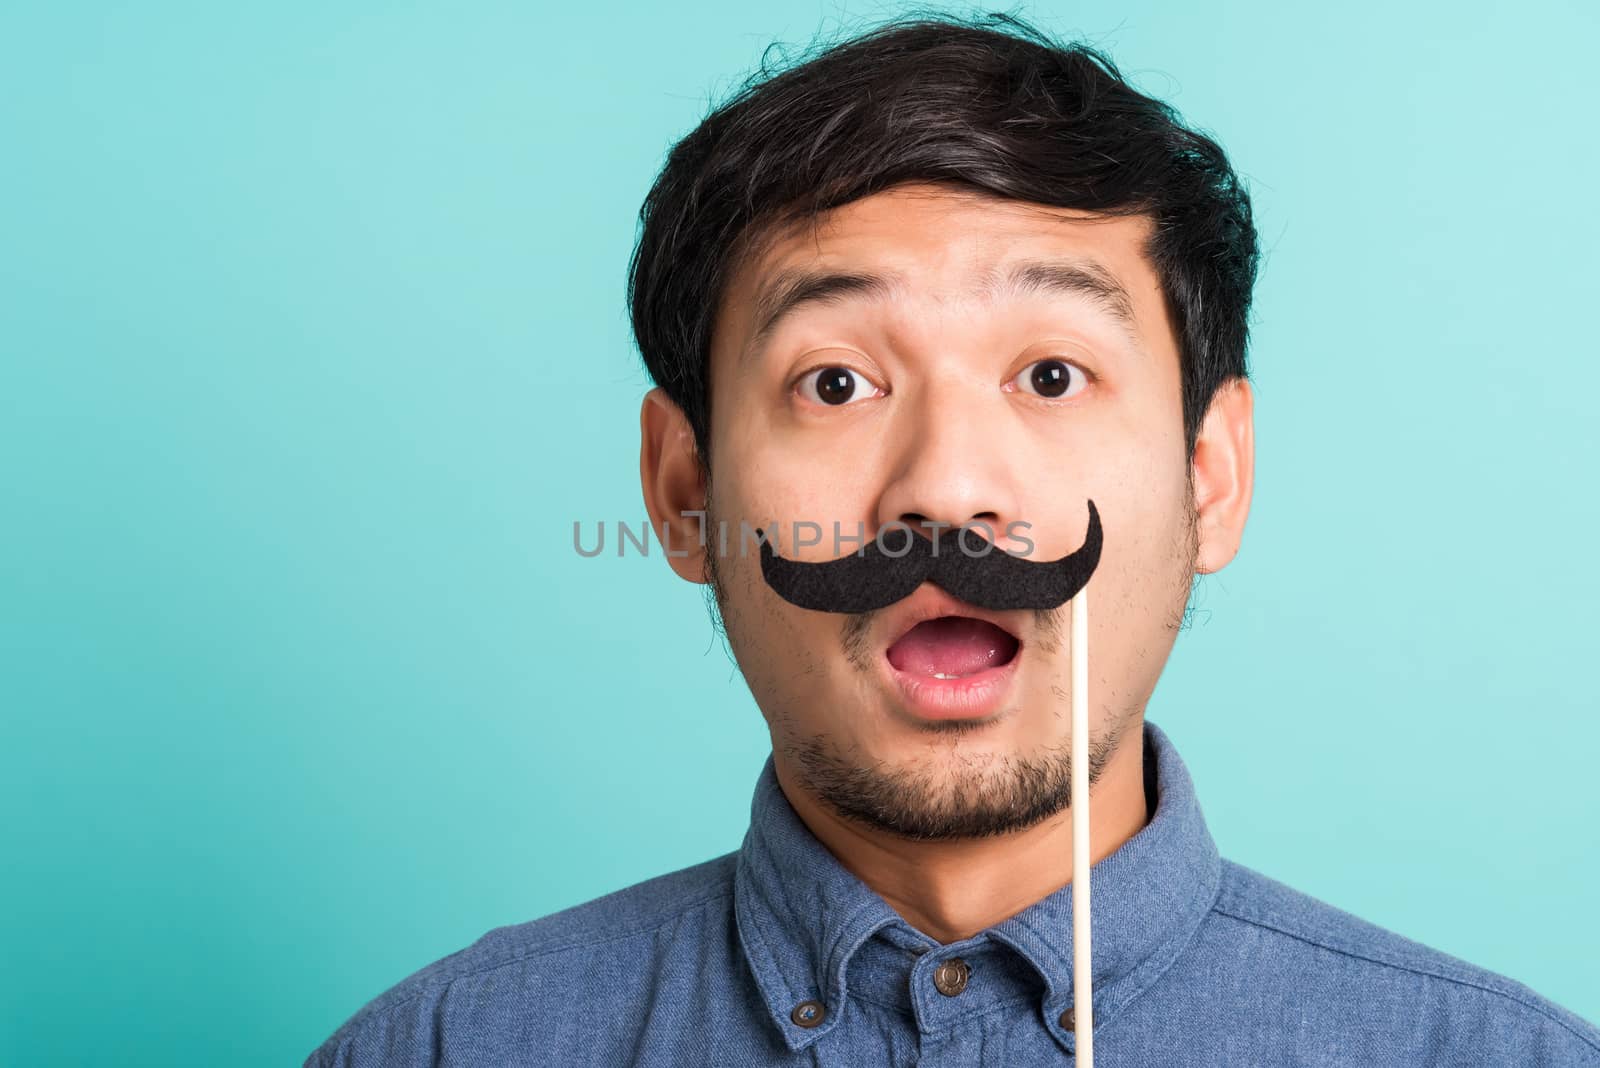 Portrait Asian happy handsome man posing he holding a funny mustache card or vintage fake moustaches on his mouth, studio shot isolated on blue background, Fathers day, November day concept